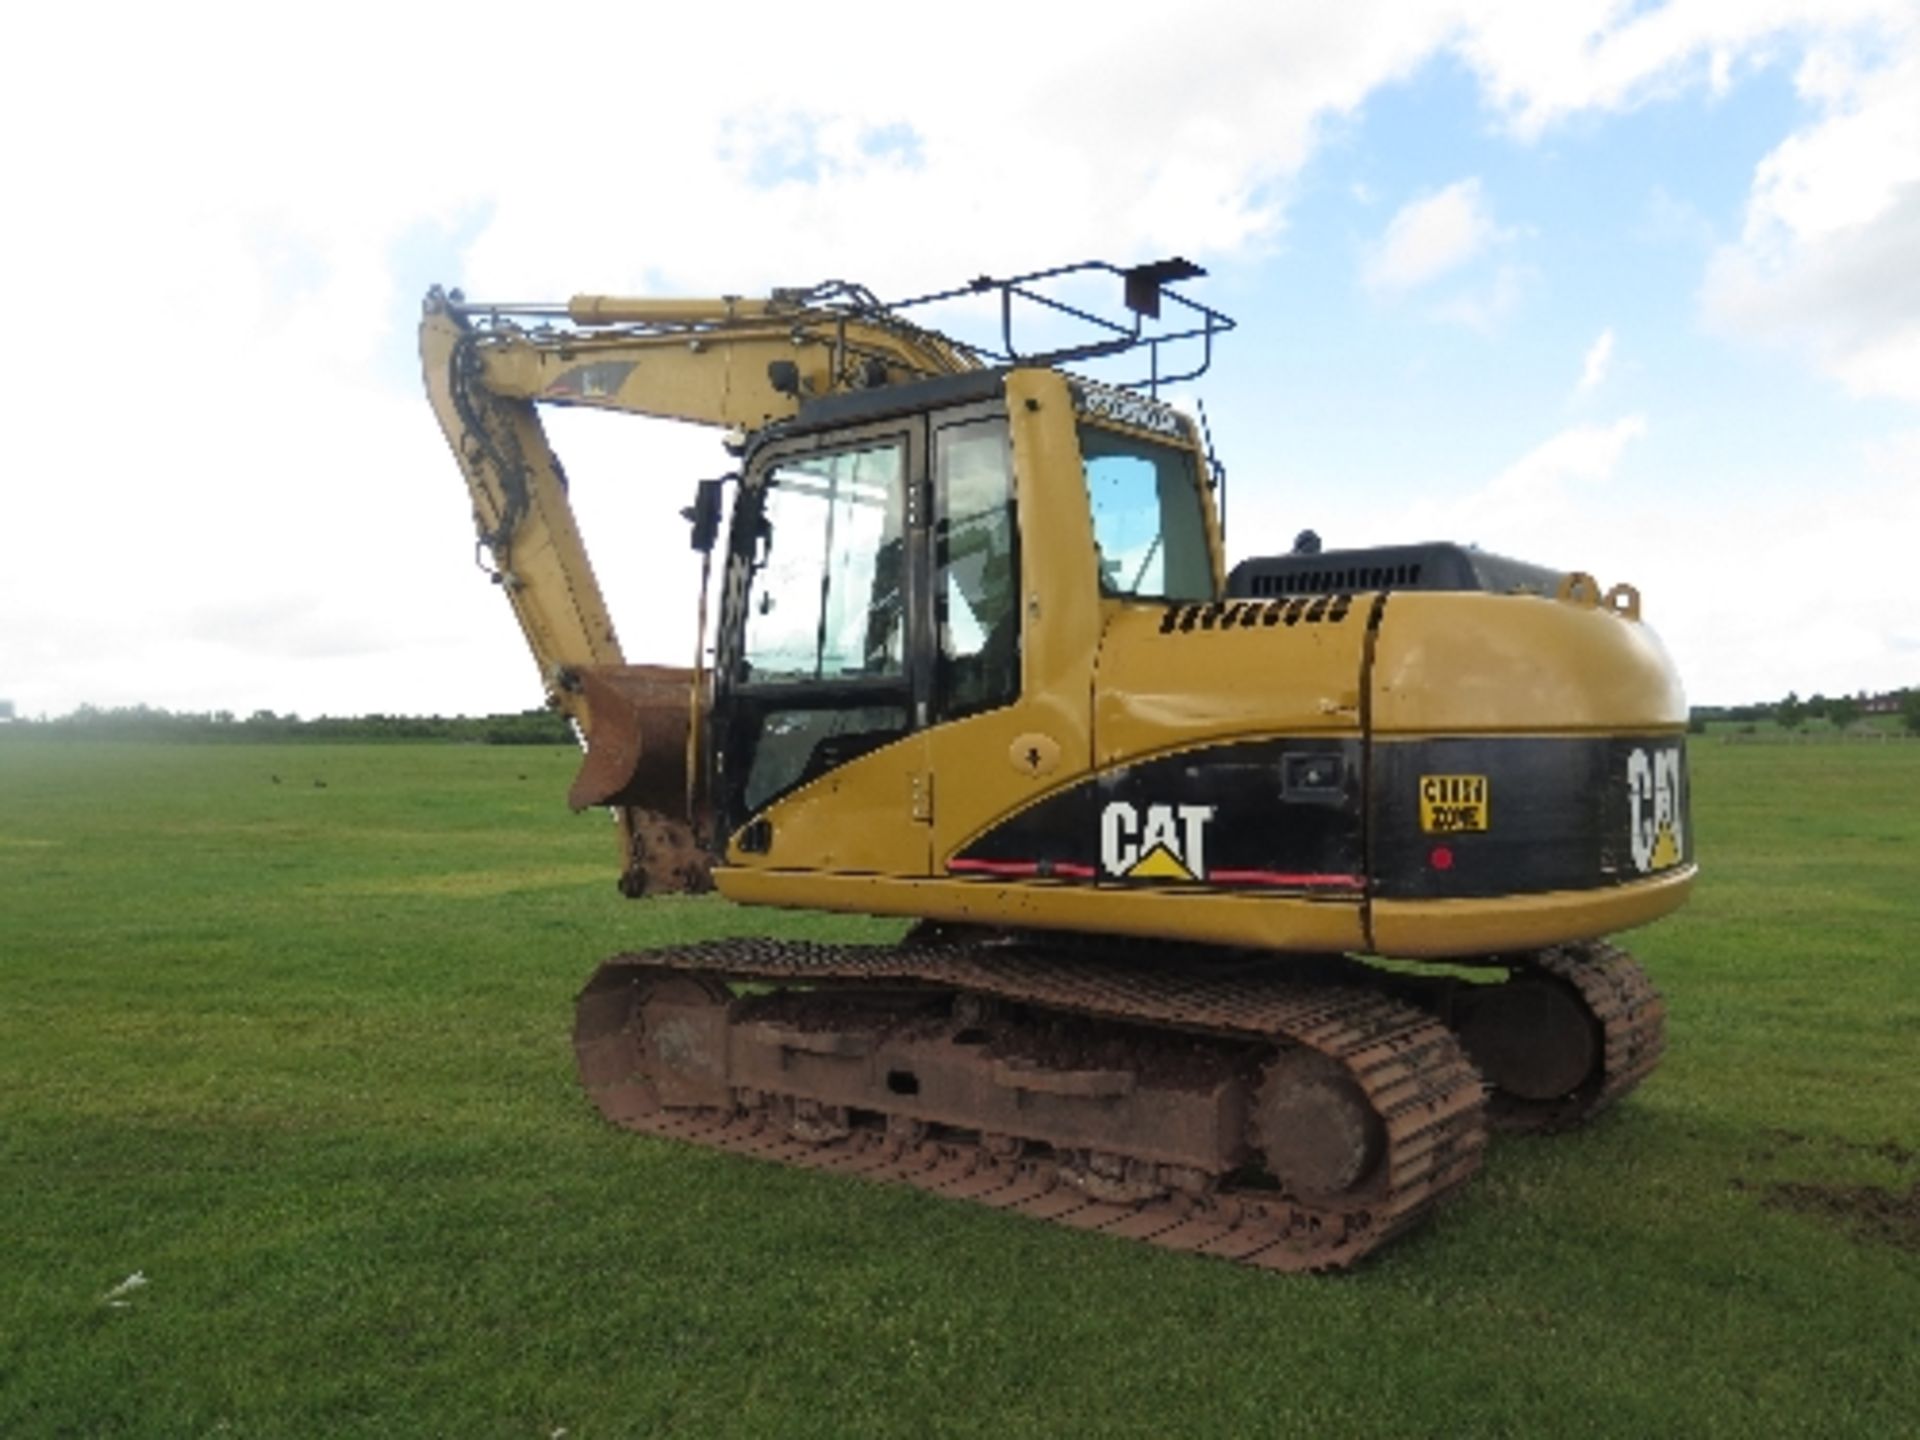 Caterpillar 312C excavator 4972 hrs 2007 145520
POOR LEFT HAND TRACKING IN REVERSE
ALL LOTS are